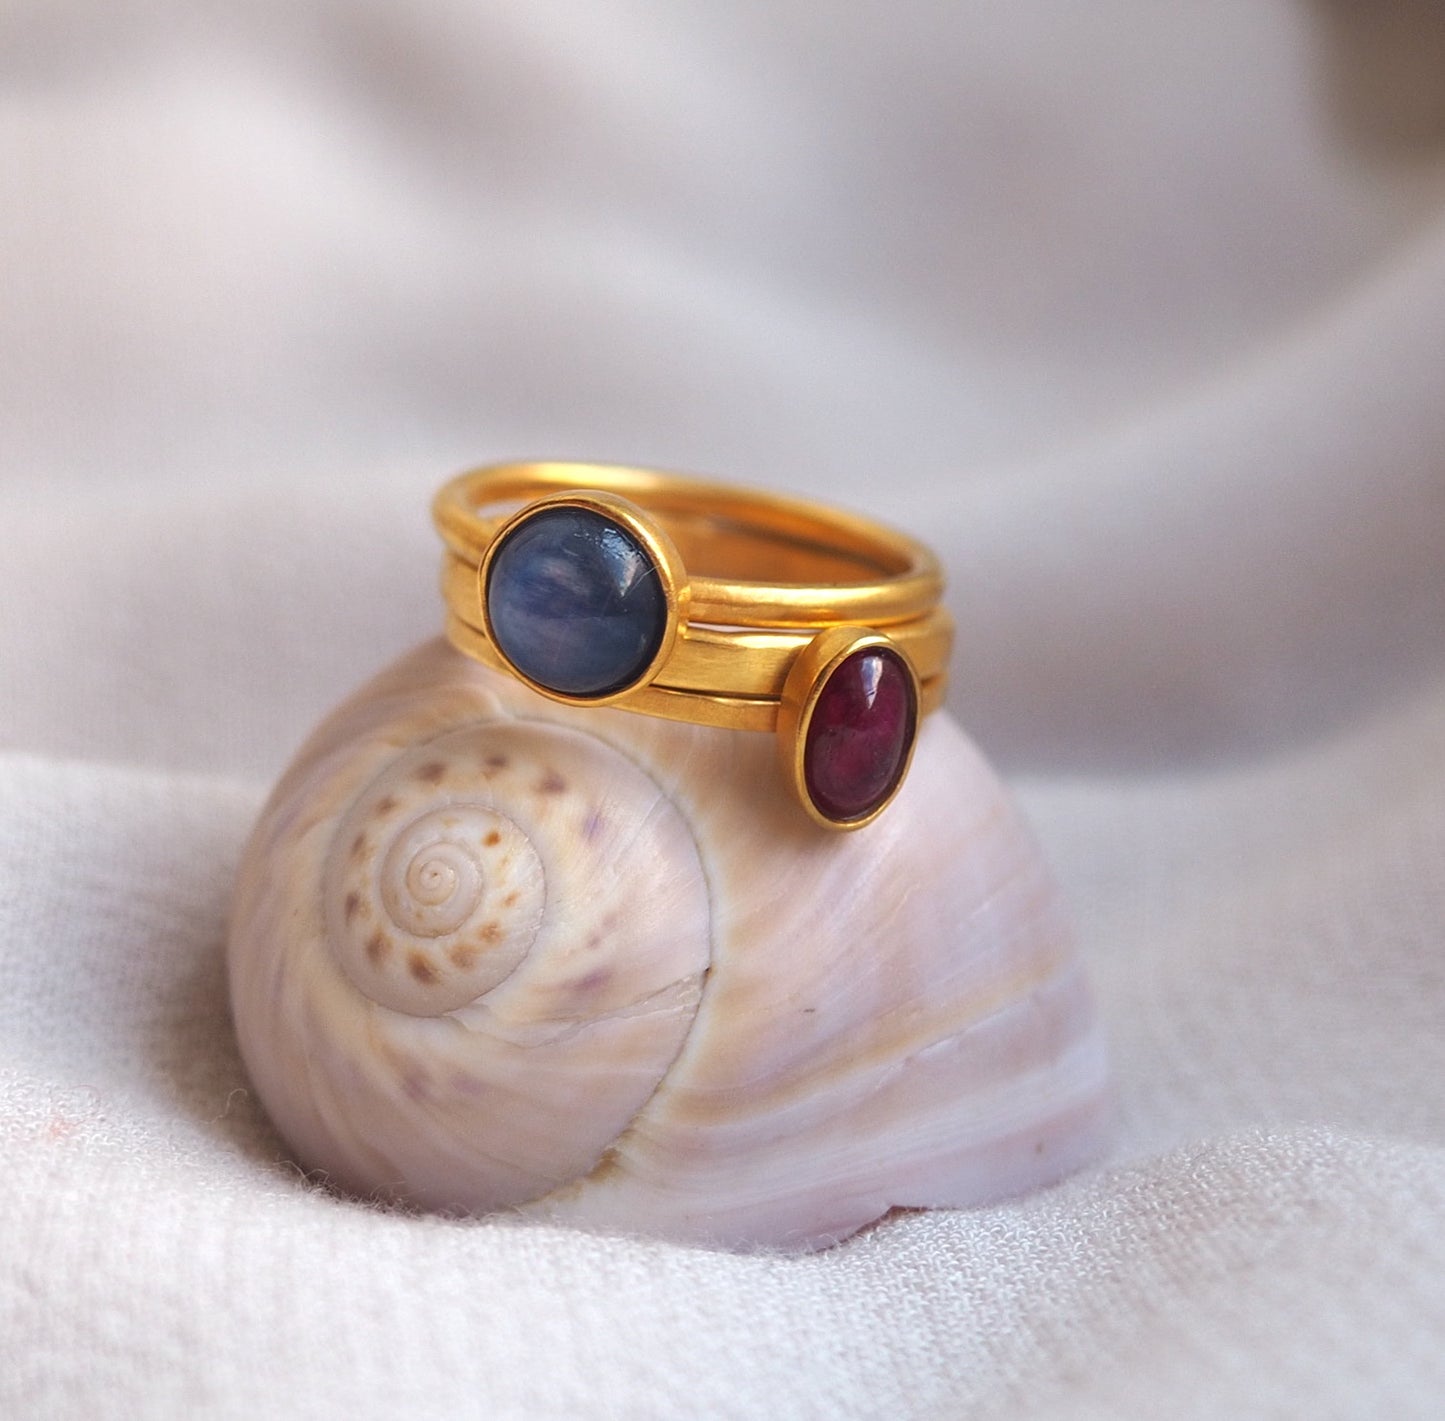 Jewelry Ring Gold Silver Handcrafted Nature Organic Design Fashion Stones Ruby Semiprescious